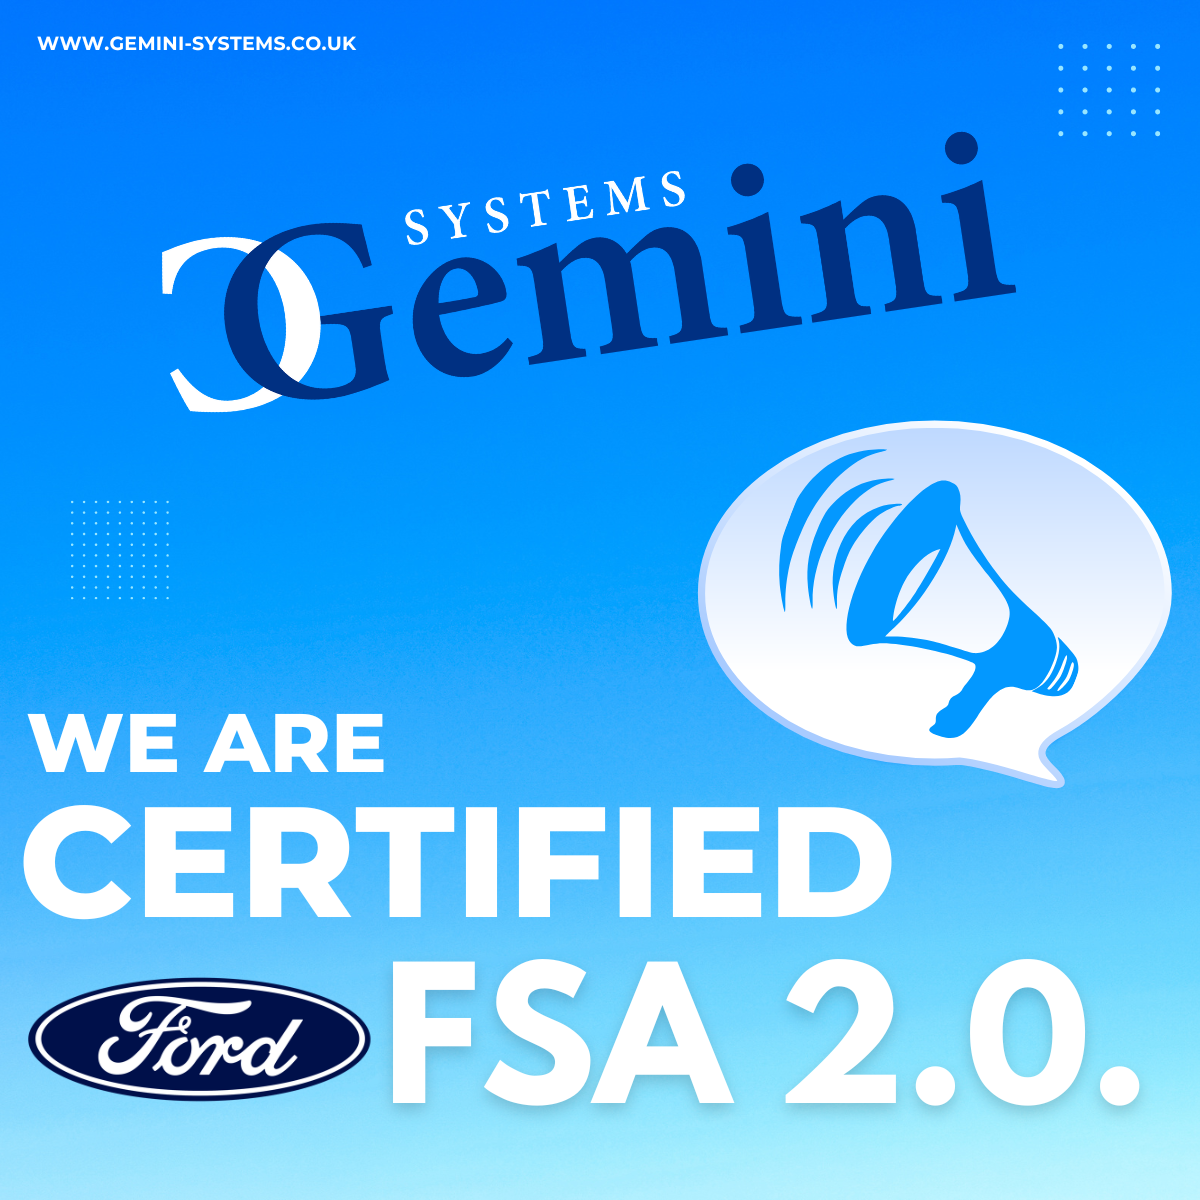 Gemini Systems are now certified for the Ford FSA 2.0 Interface.